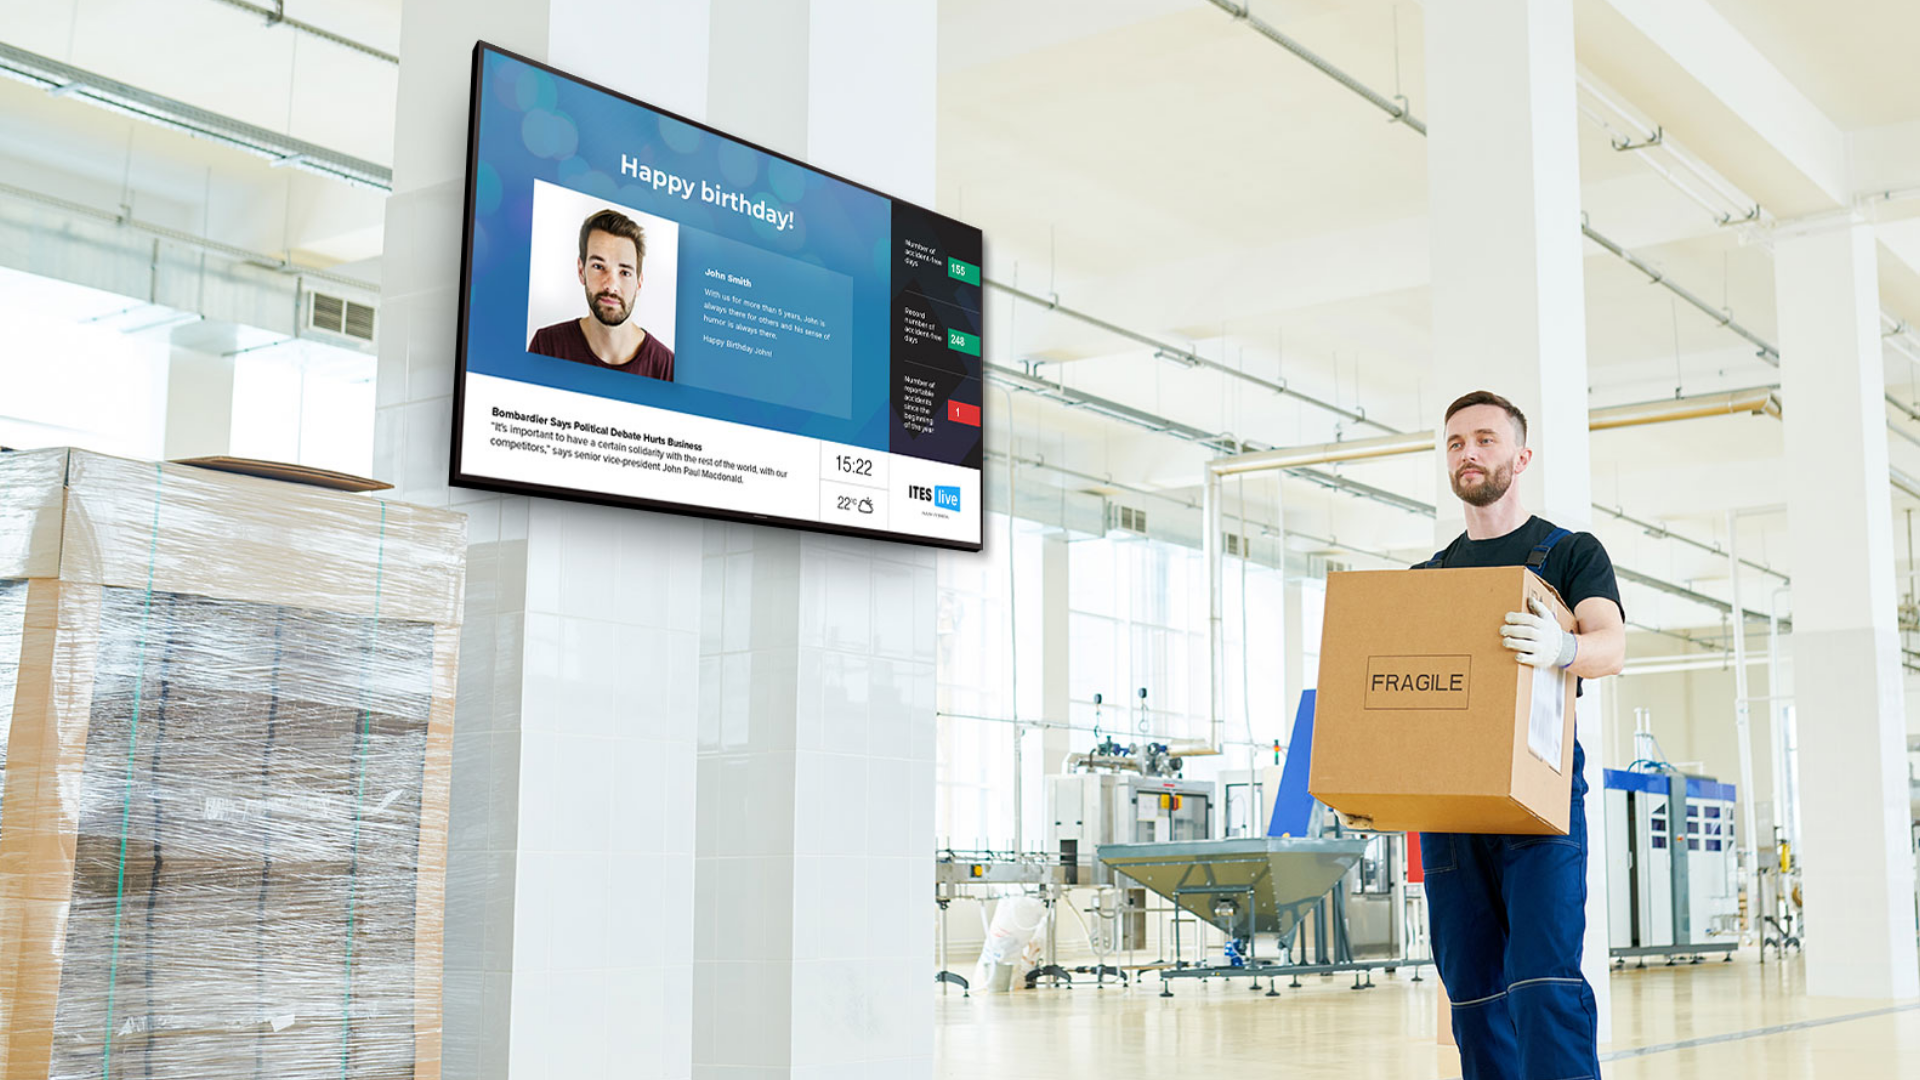 Reasons for using digital signage in factories